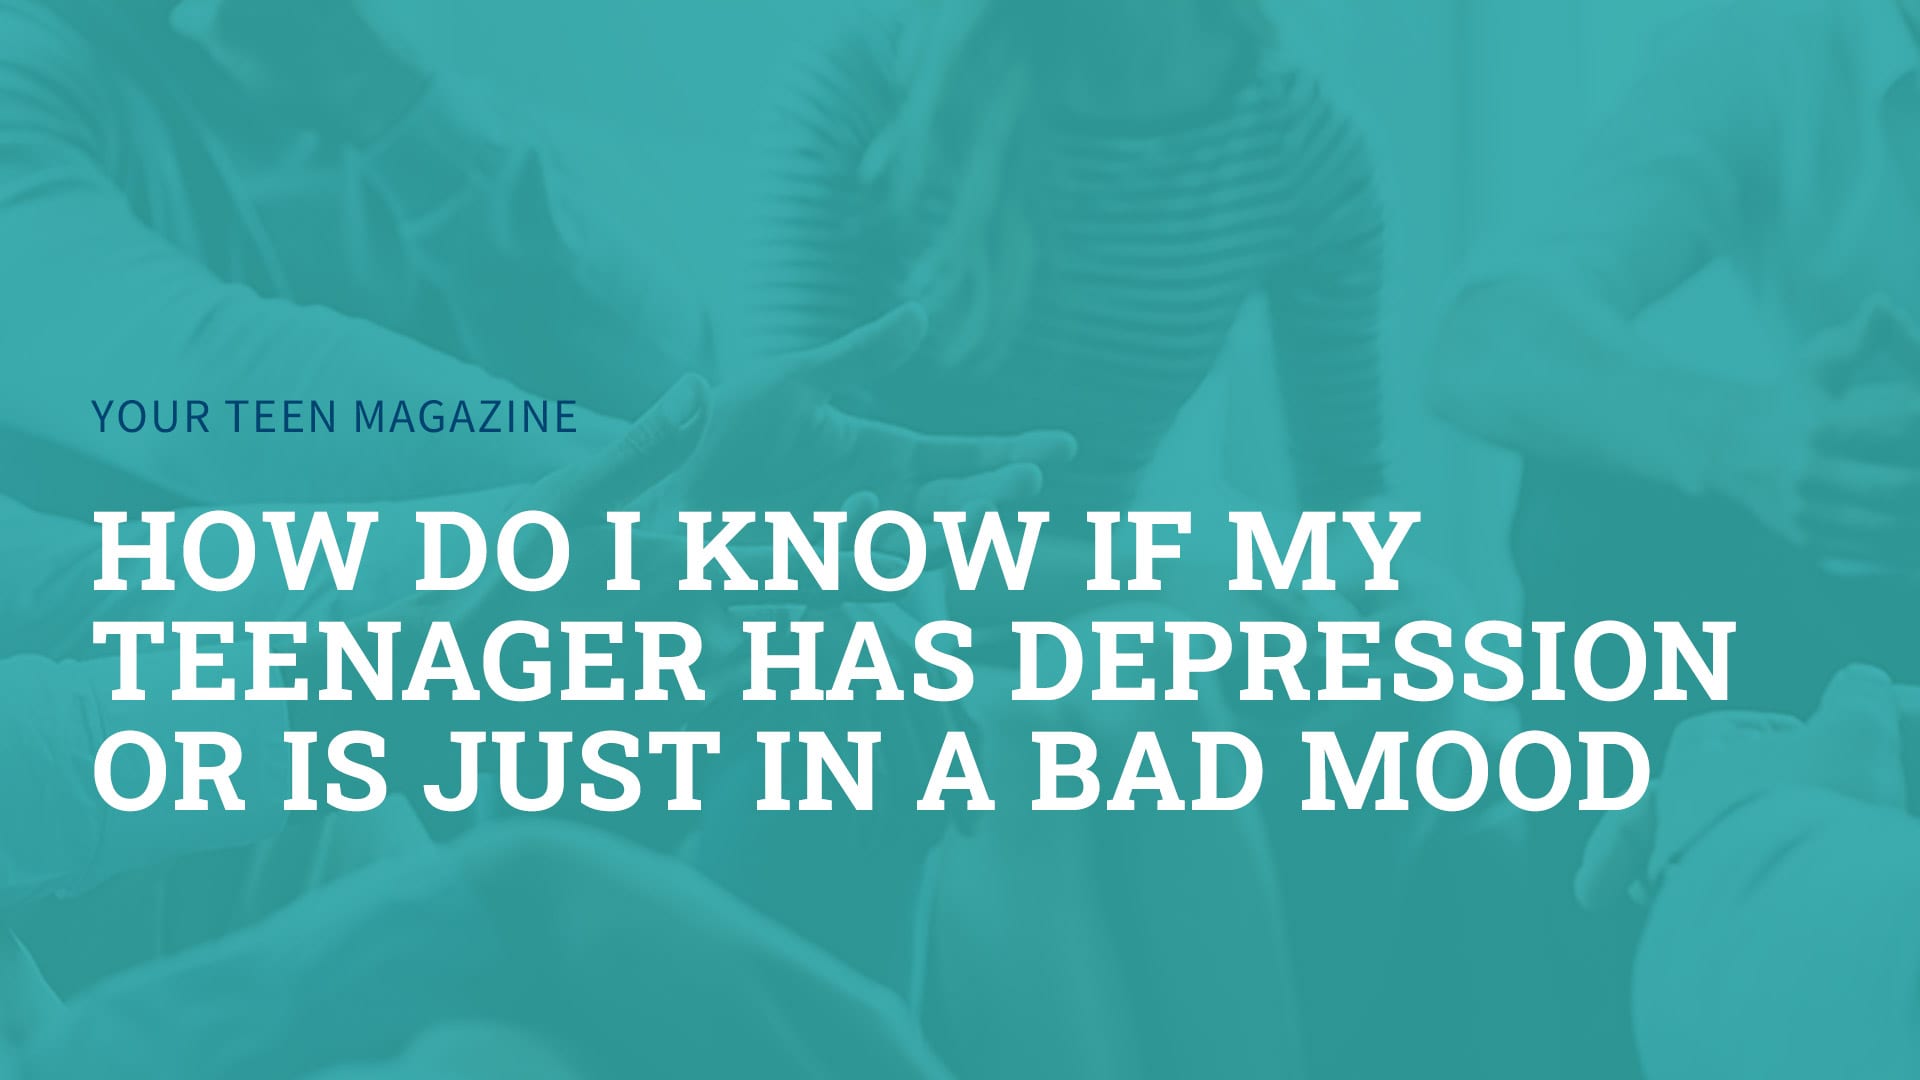 how do i know if my teenager has depression or is just in a bad mood